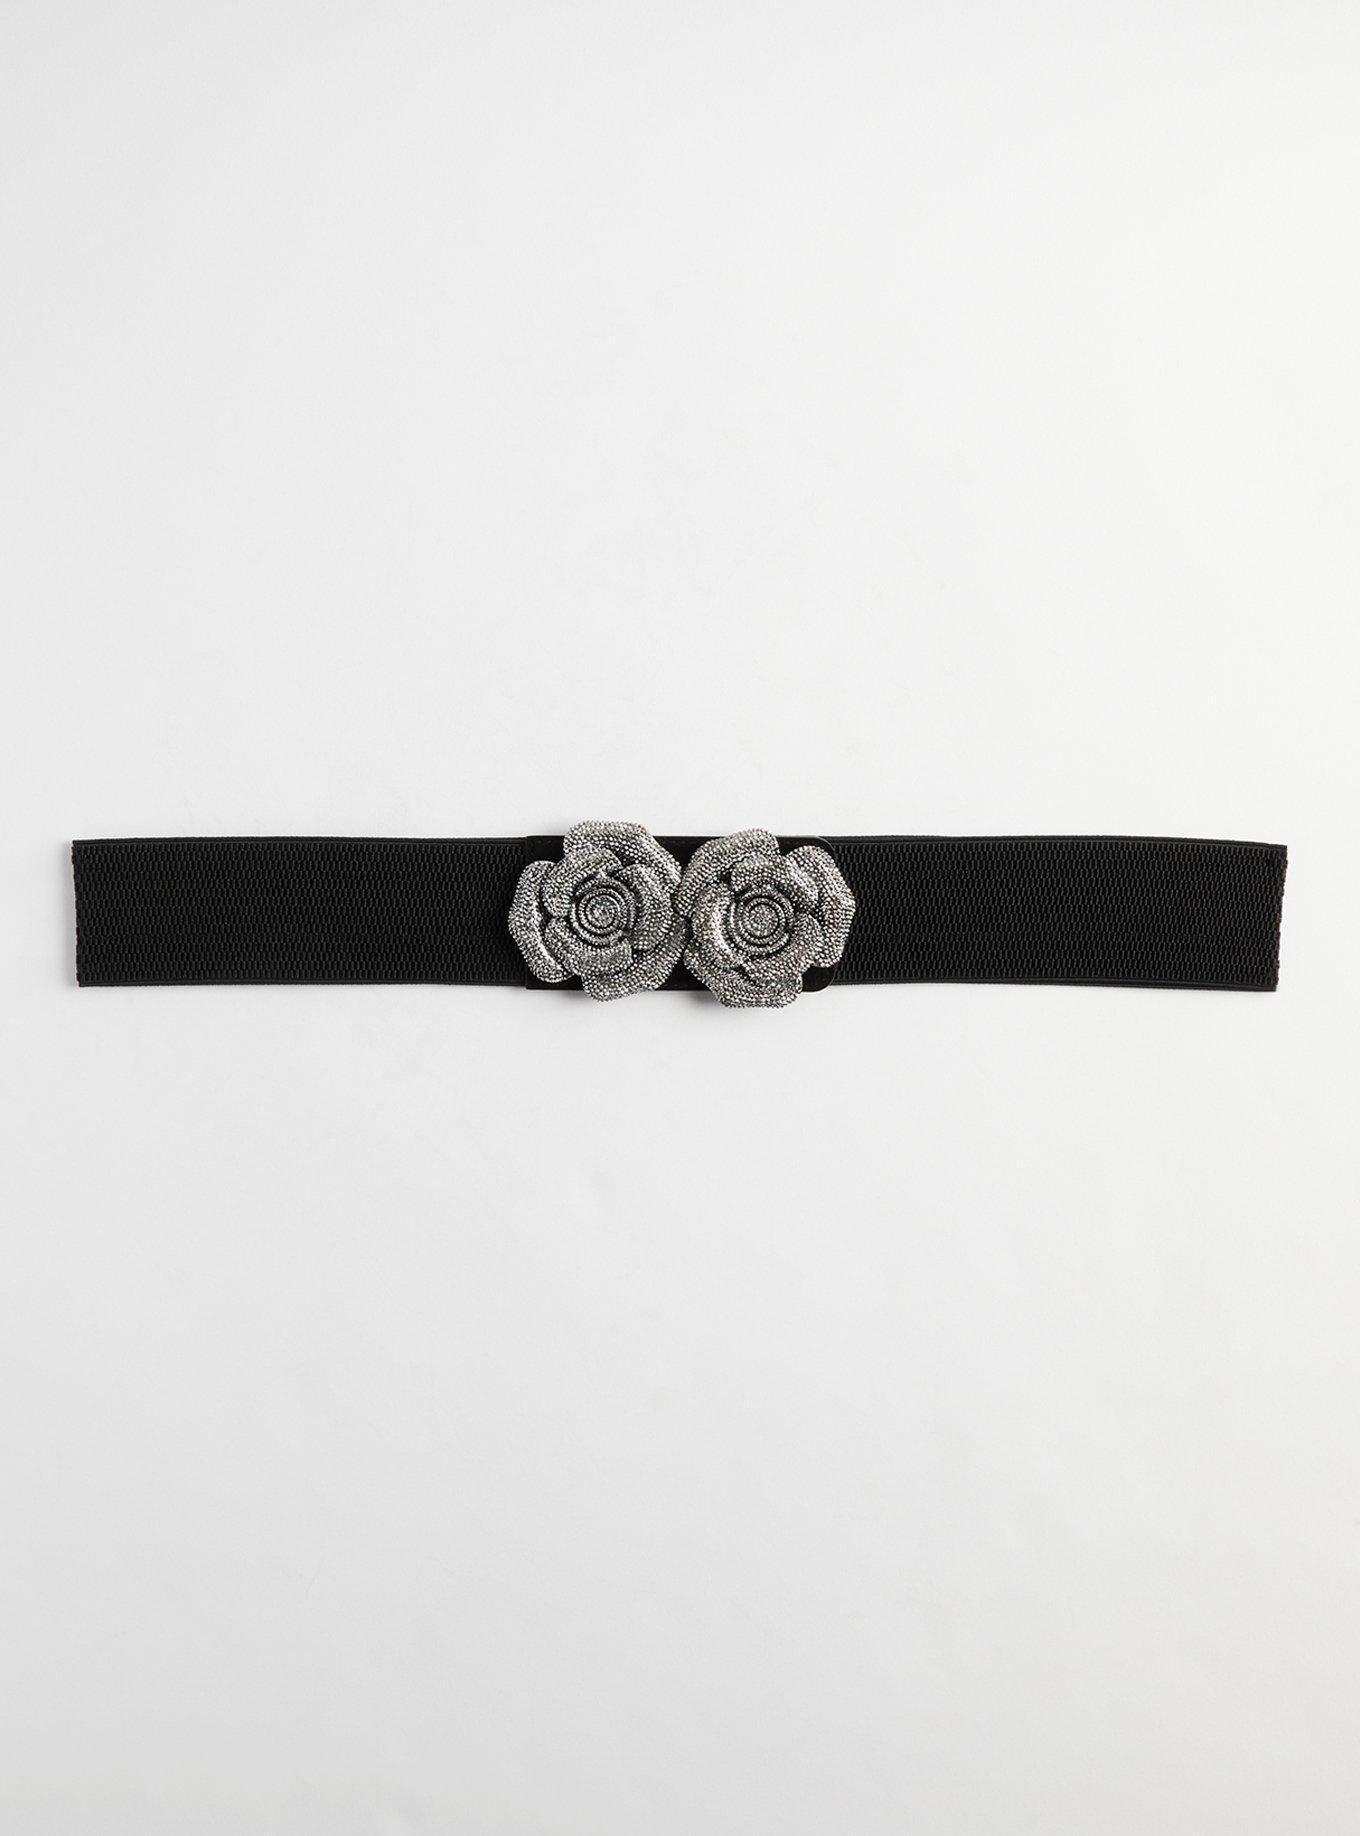 Plus size belts from onceuponabelt.com